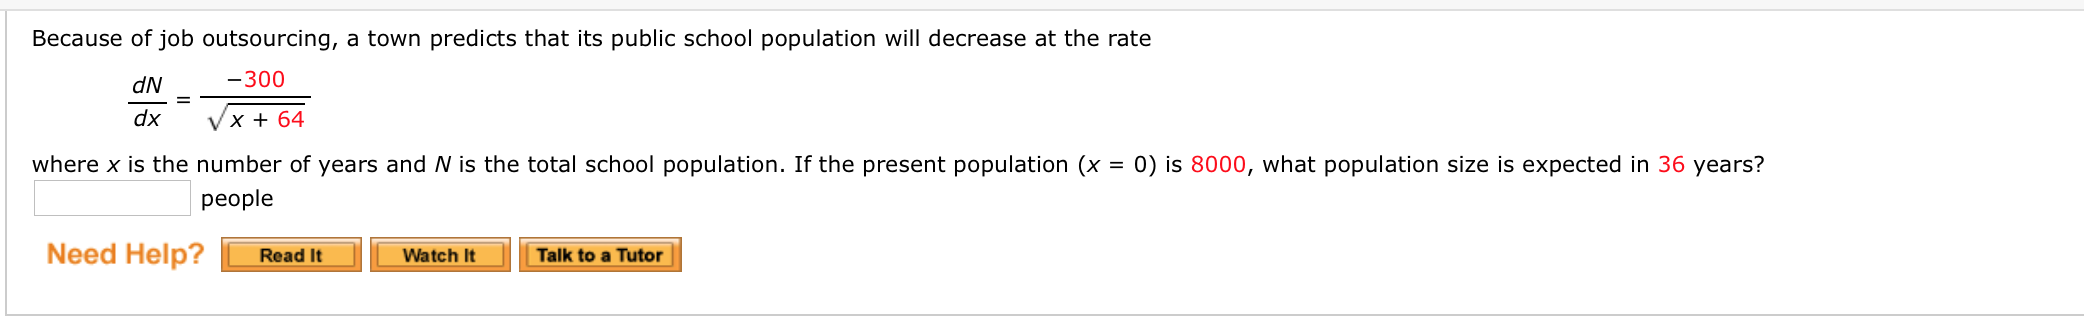 Because of job outsourcing, a town predicts that its public school population will decrease at the rate
dN
-300
dx
Vx + 64
where x is the number of years and N is the total school population. If the present population (x = 0) is 8000, what population size is expected in 36 years?
рeople
